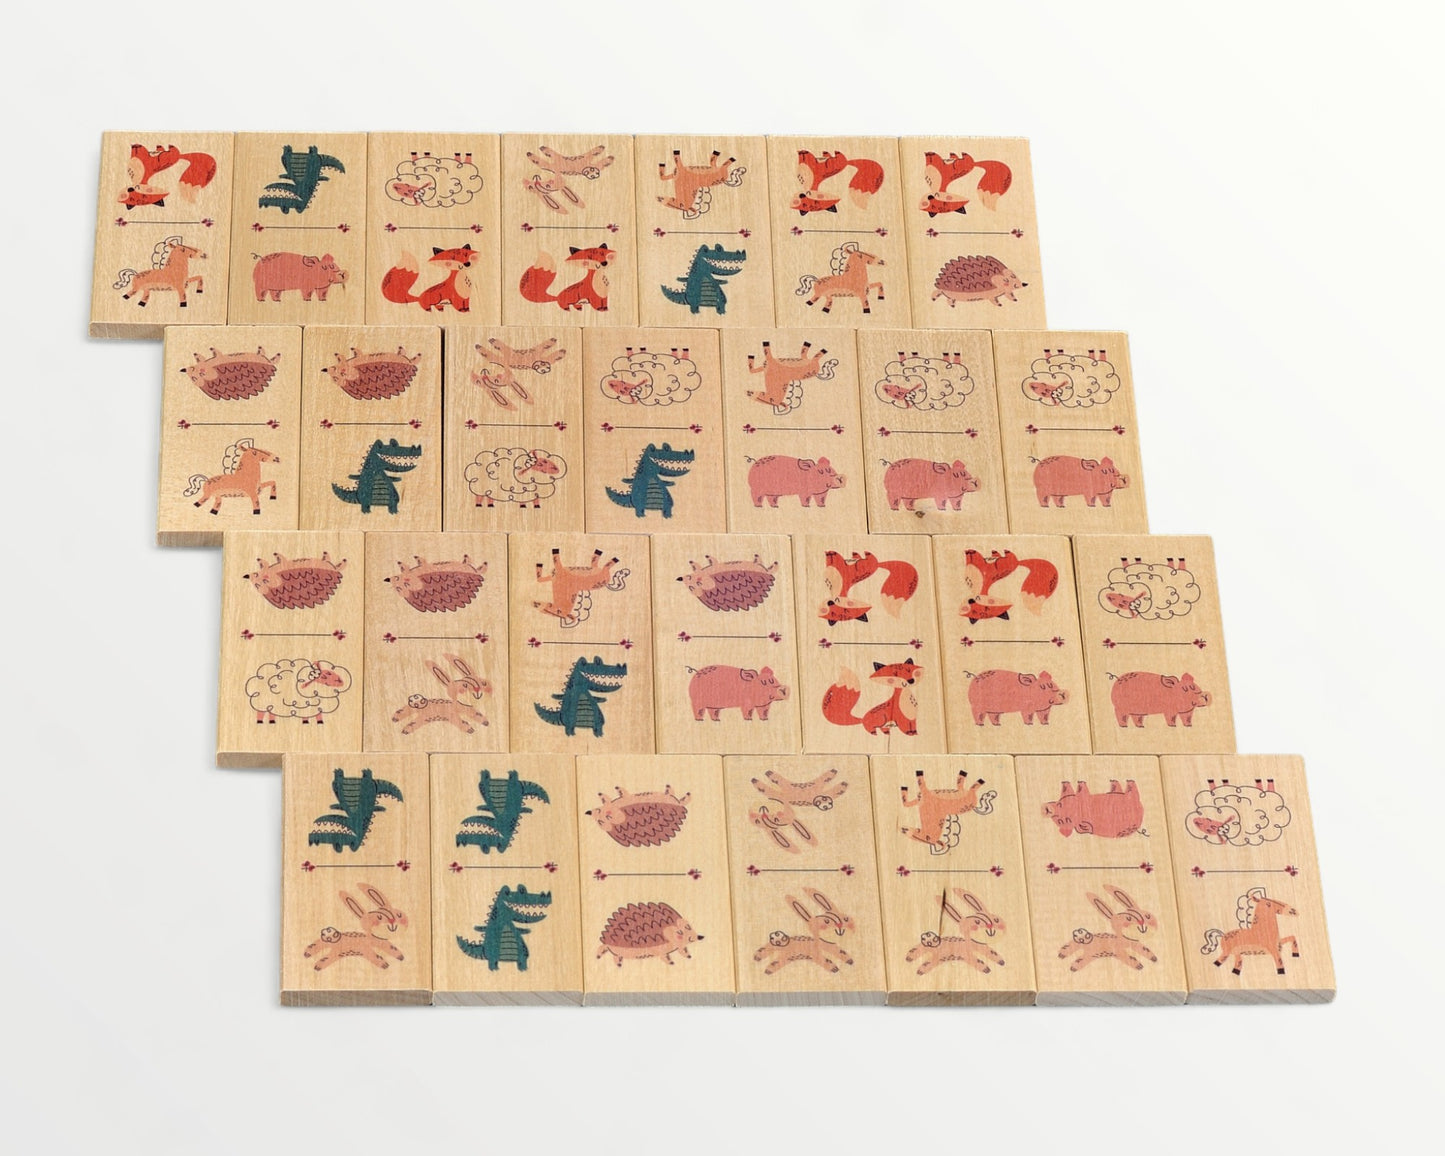 Board game - Dominoes - Animals and dots